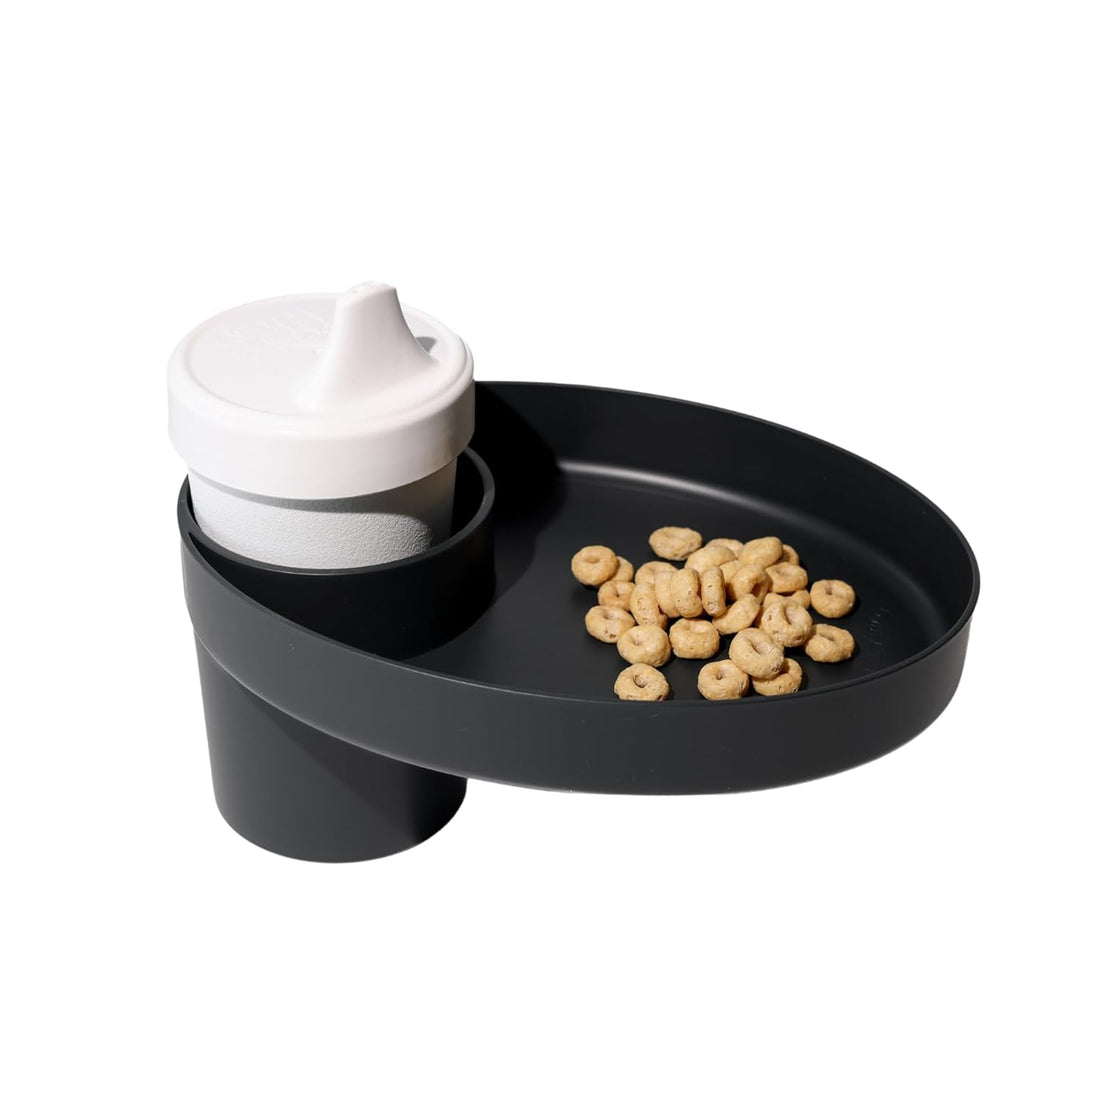 My Travel Tray/Oval - USA Made. Extend Your Current Cup Holder to Hold Your Cup Plus a Tray for Snacks, Toys and Accessories. Enjoyed by Toddlers, Kids and Adults! (Pirate Black)